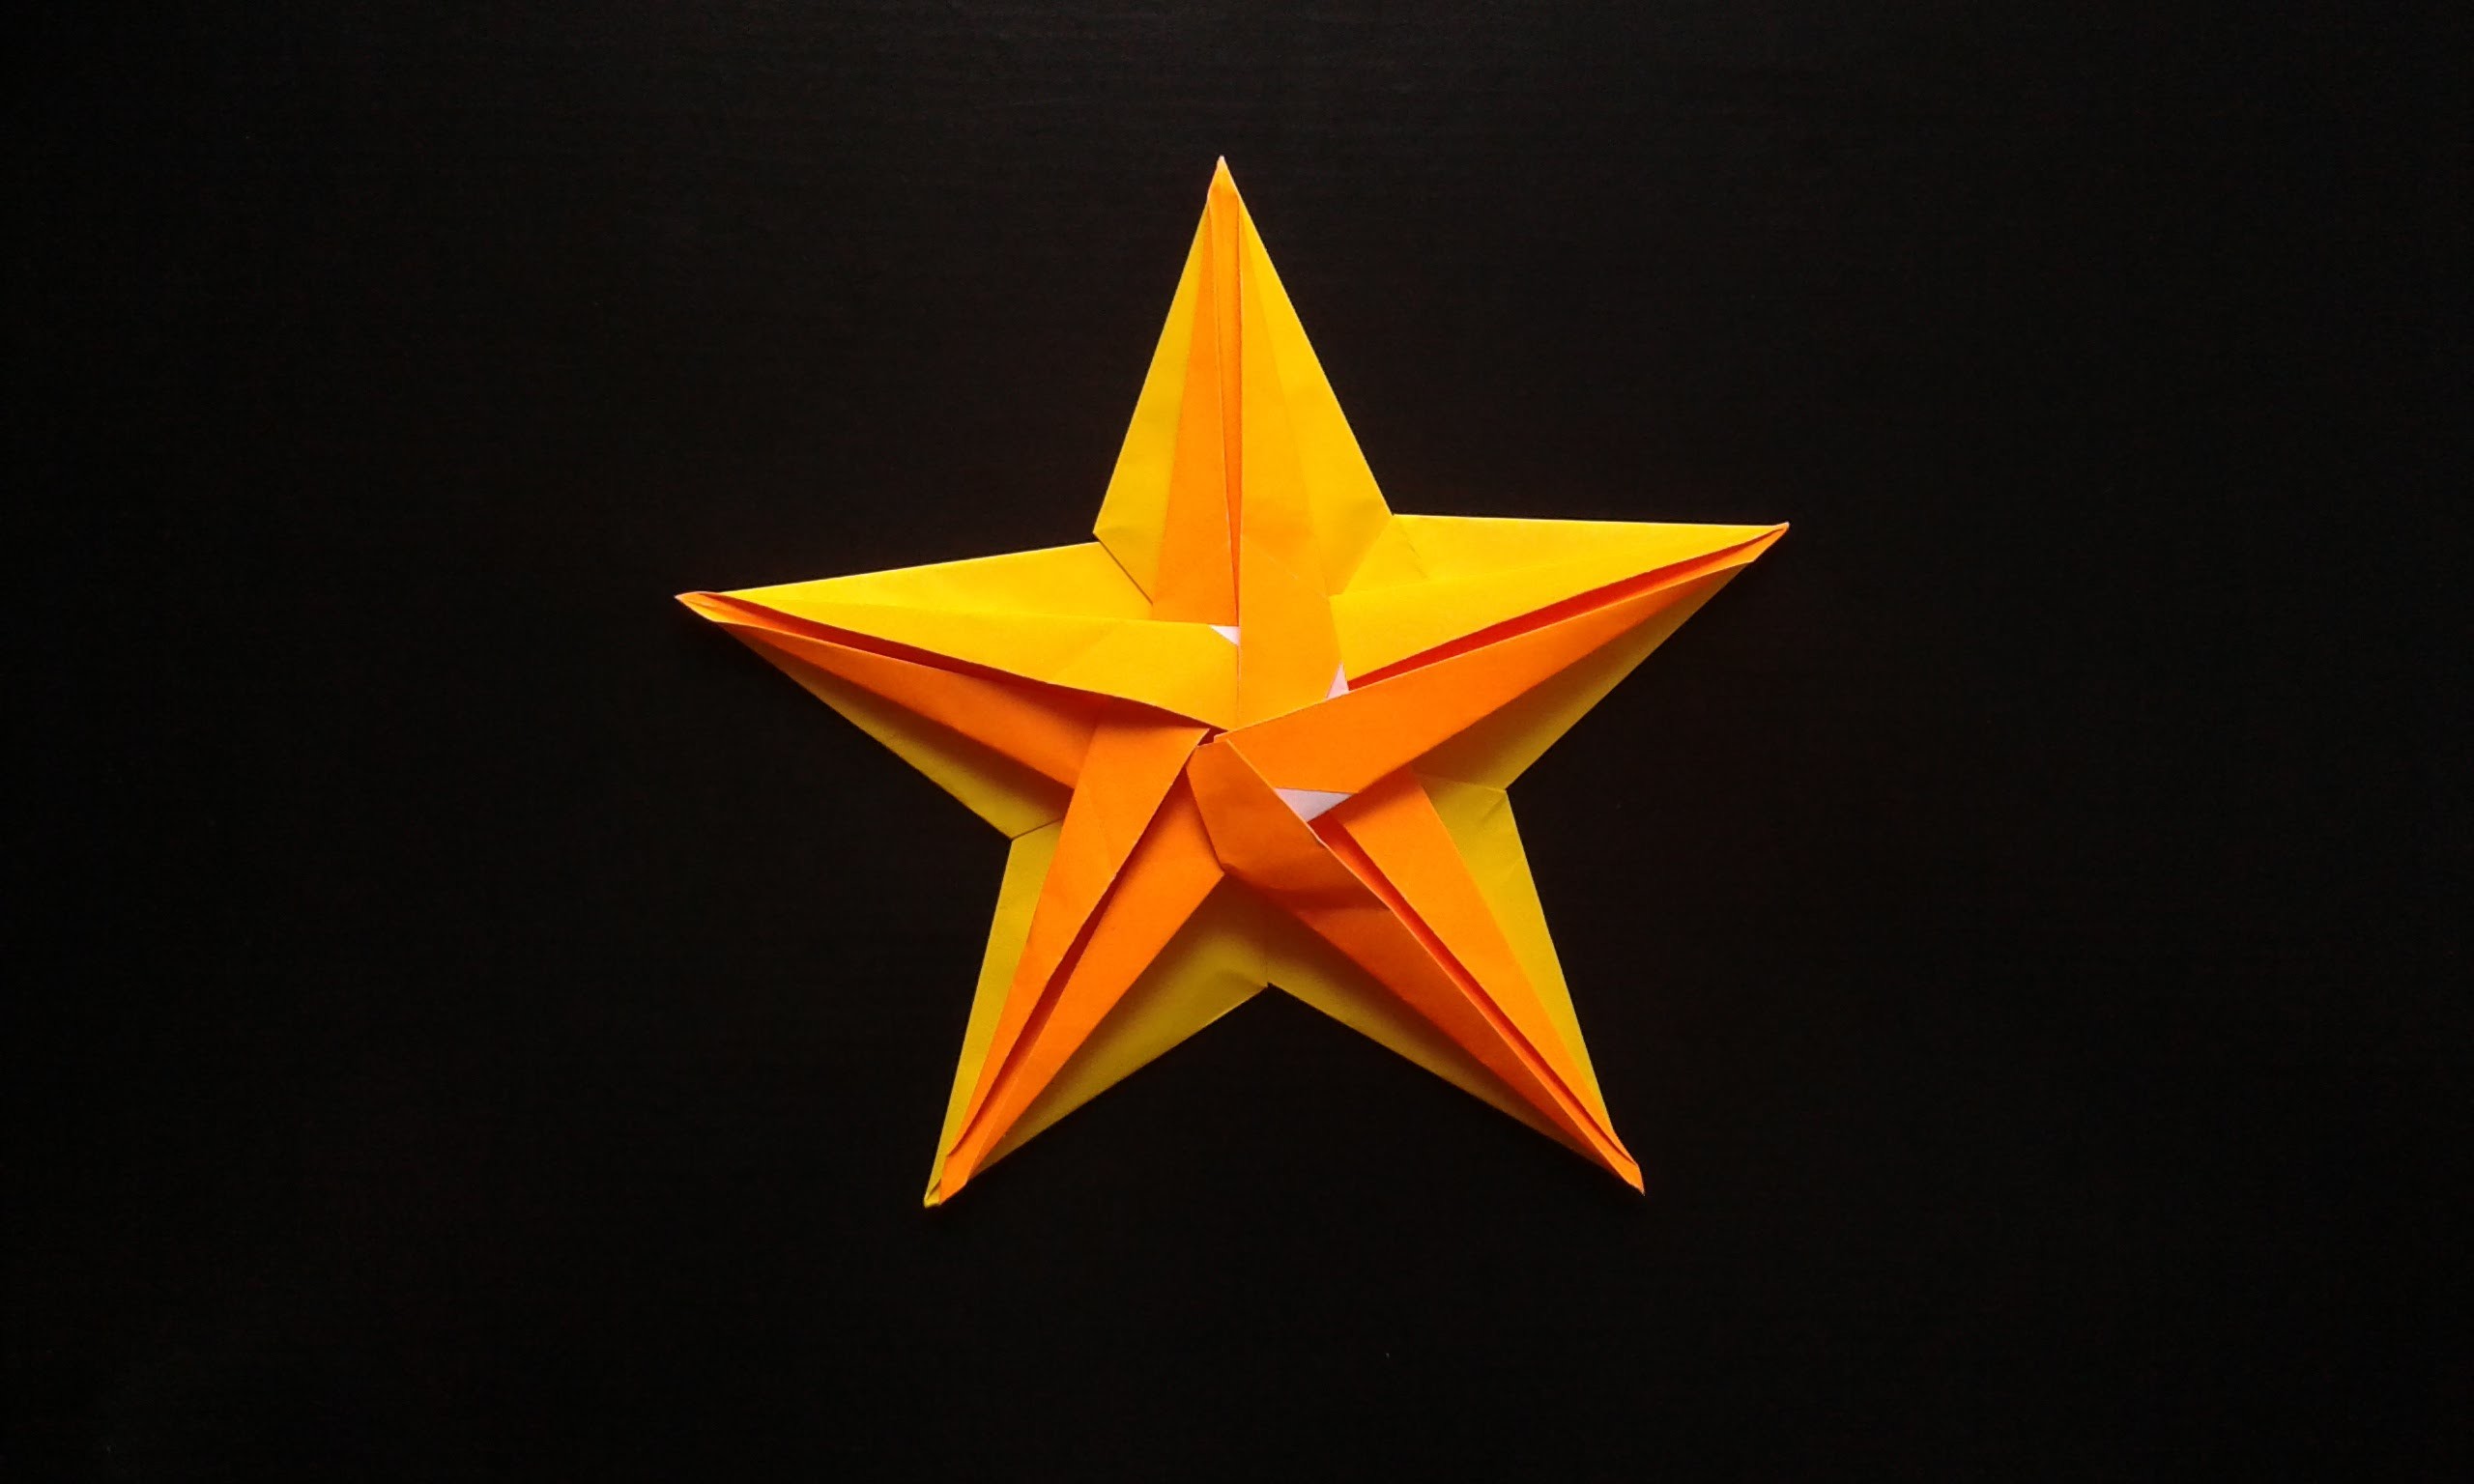 How to make a paper pentagonal  star + accessory part 2 origami